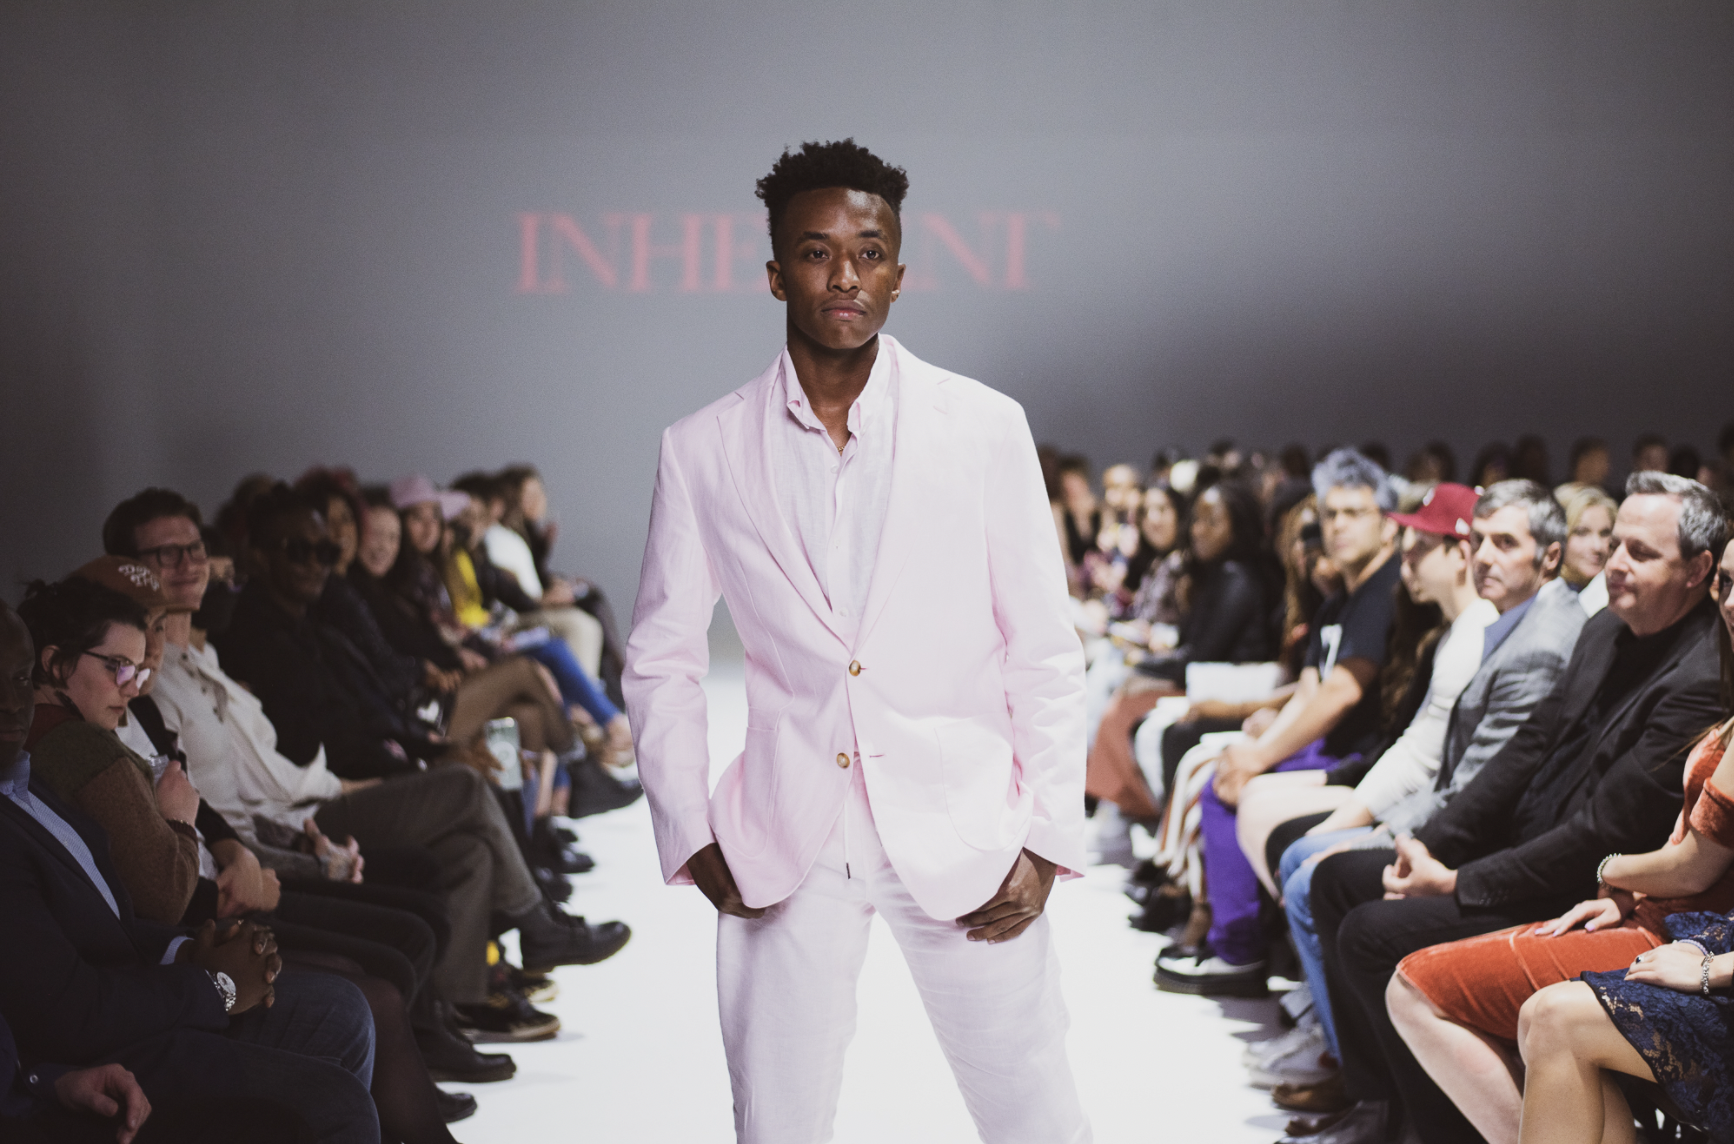 Inherent Your Style By Taylor Draper--Men's Health Meets Fashion